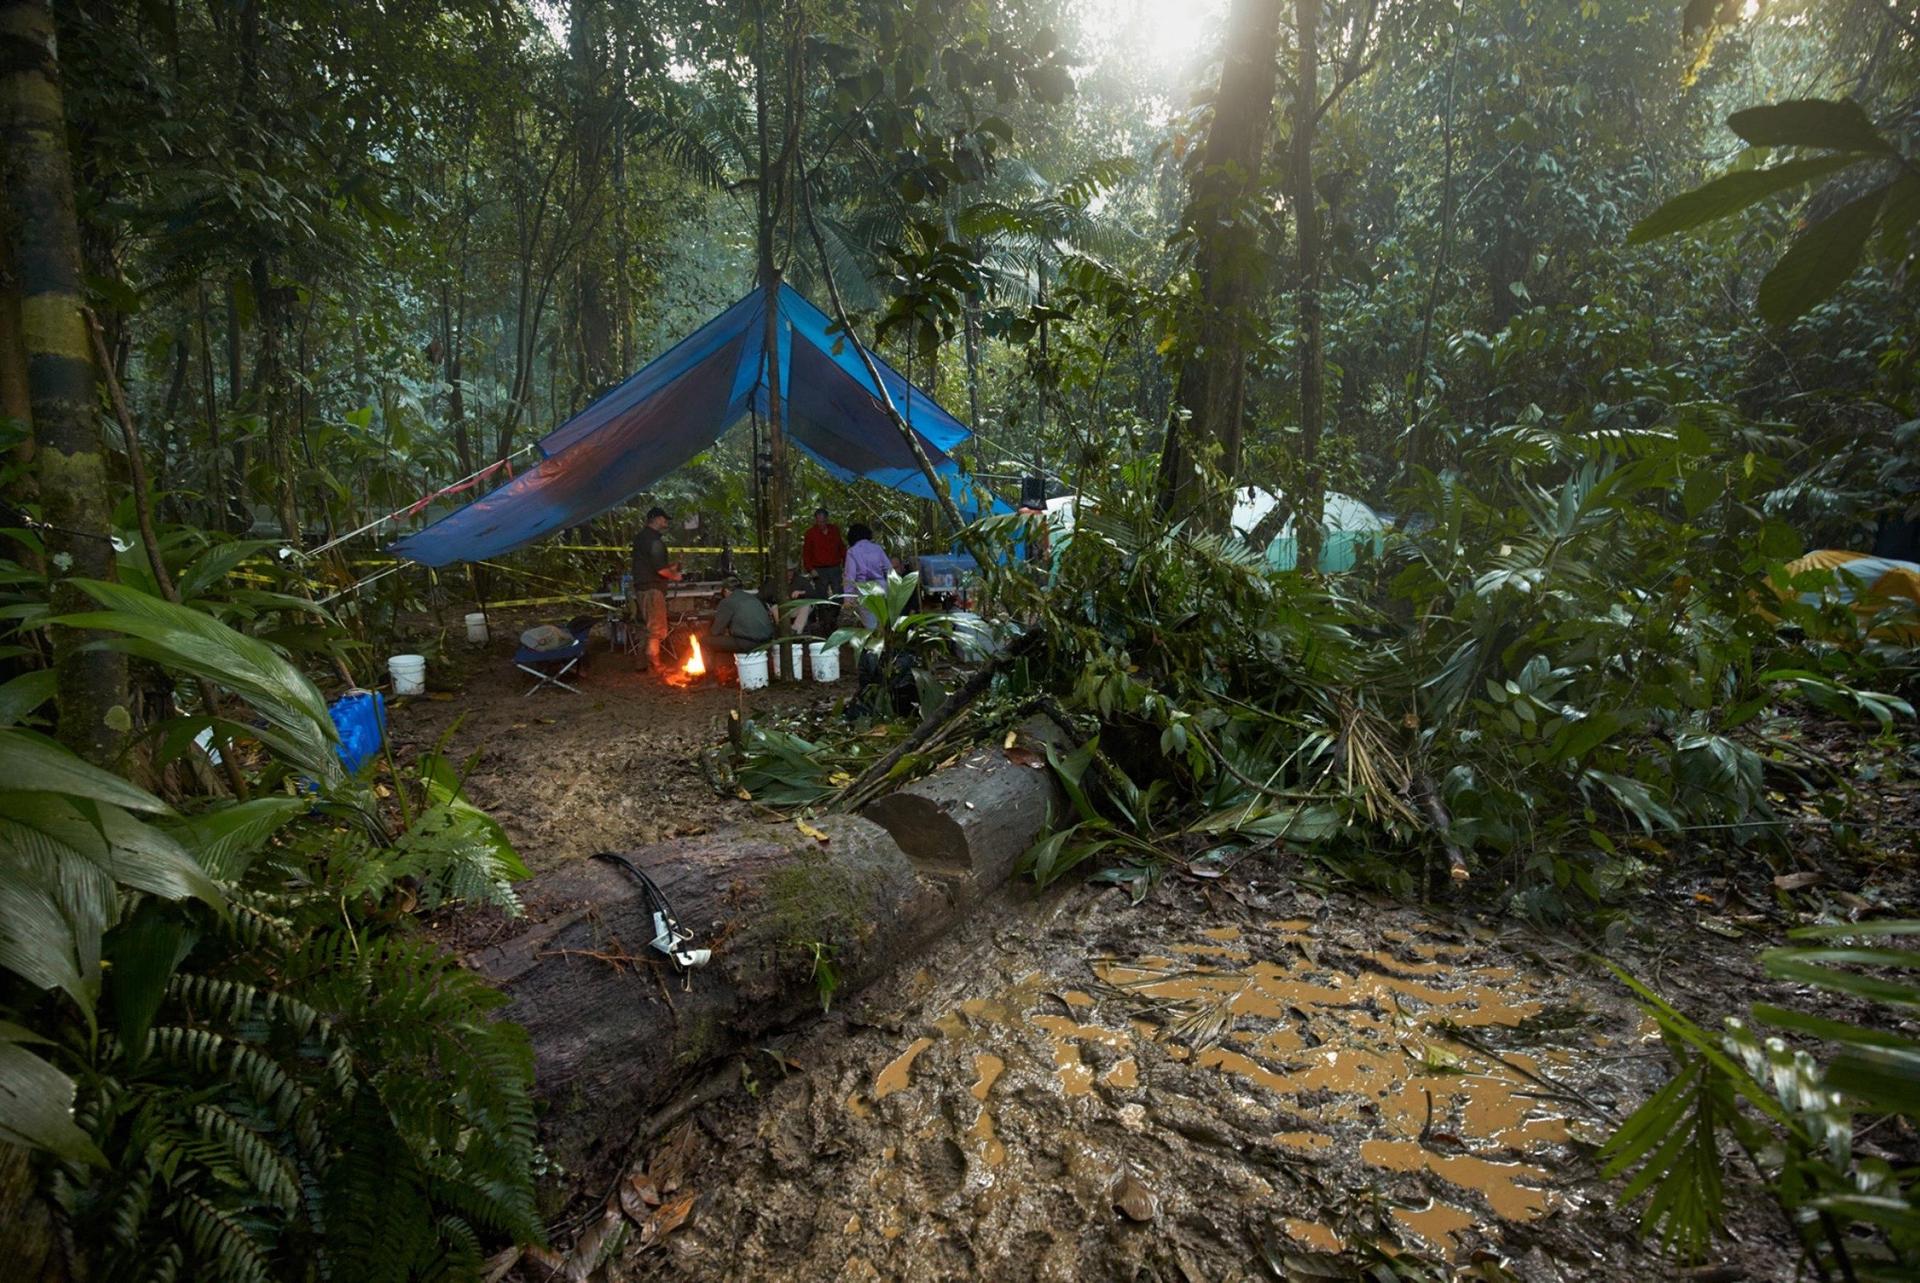 The “kitchen” area of the expedition’s camp deep in the Mosquitia jungle, 2015. The area was so remote, the animals apparently had never seen people before and wandered about, unafraid.